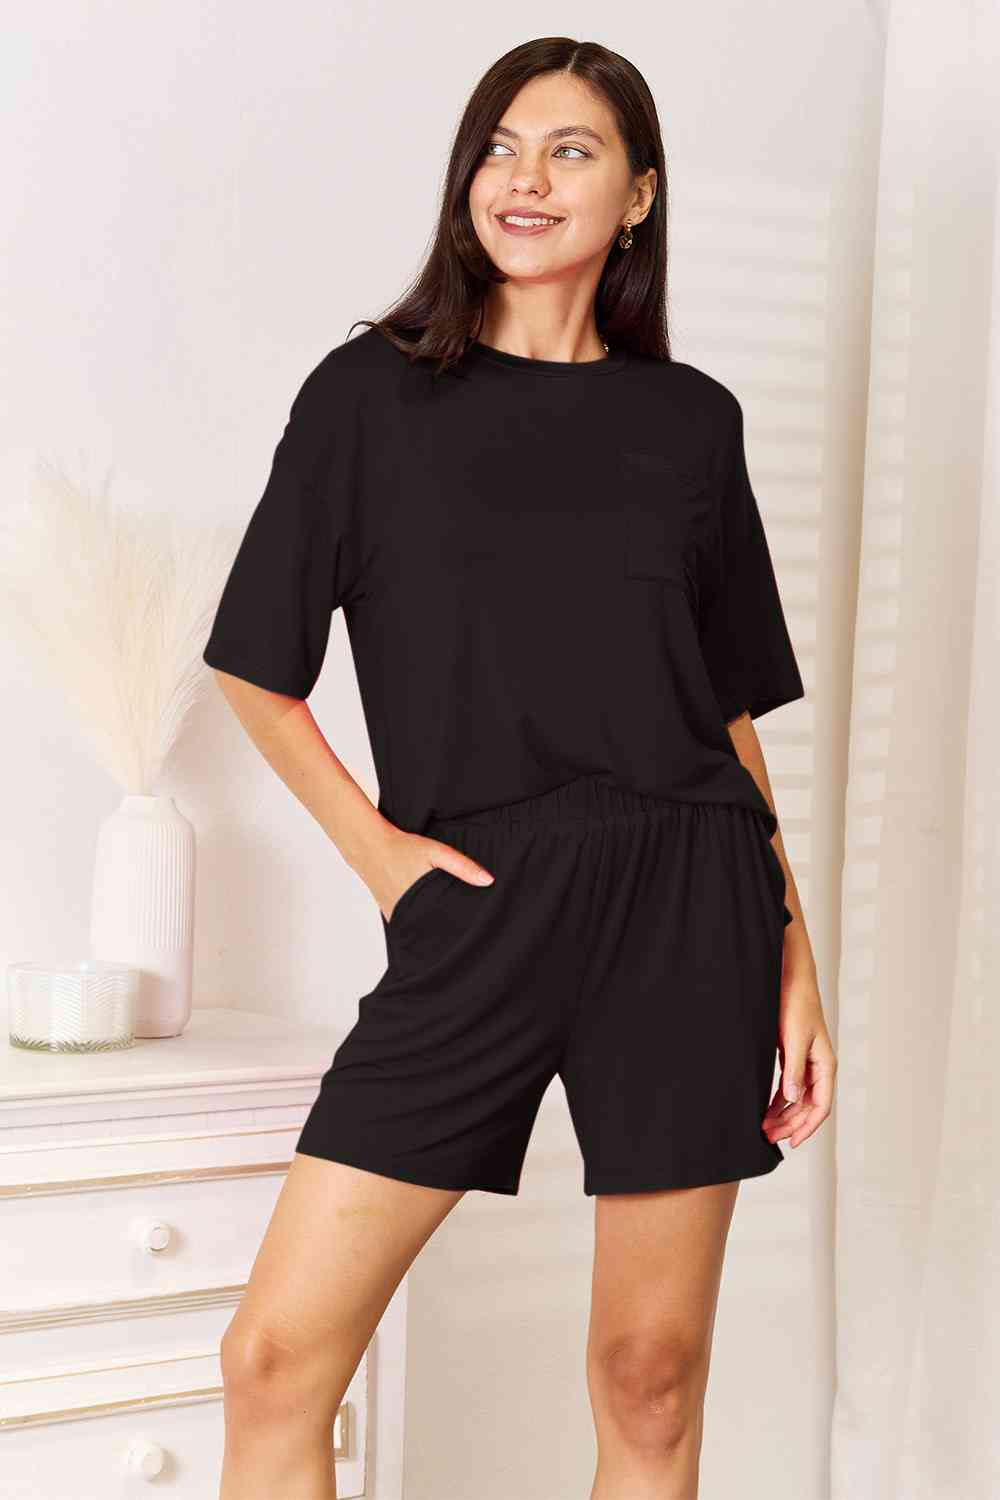 Soft Rayon Half Sleeve Top and Shorts Set - Black / S - Camis & Tops - Outfit Sets - 5 - 2024